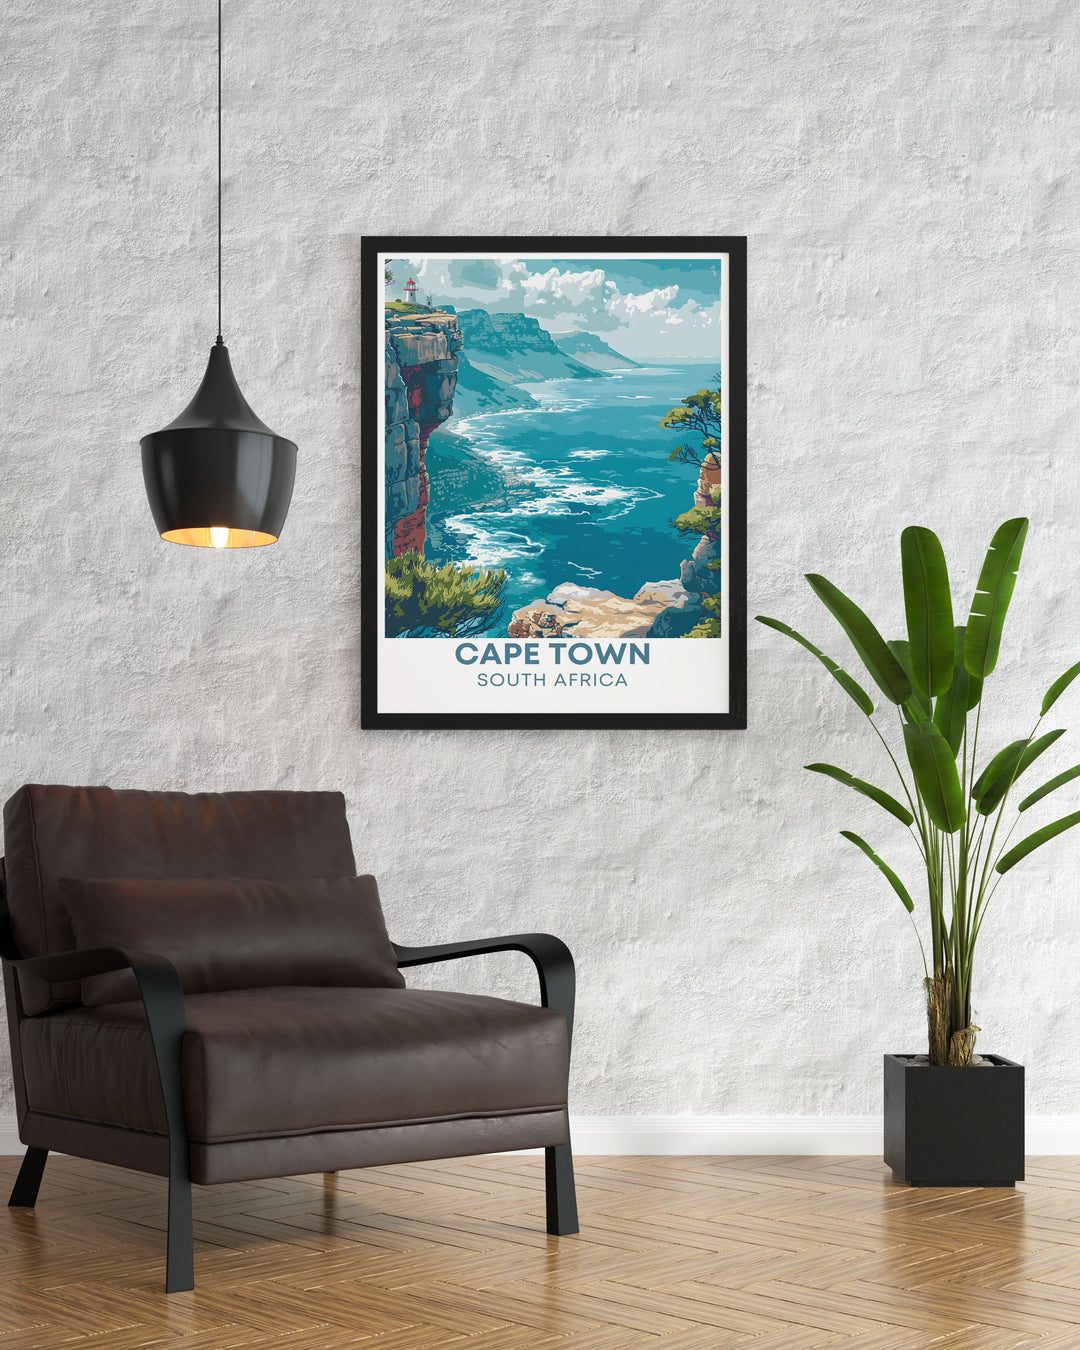 The captivating blend of rugged landscapes and ocean vistas at Cape Point and Table Mountain is beautifully illustrated in this poster, making it a stunning addition to any wall art collection celebrating South Africa.